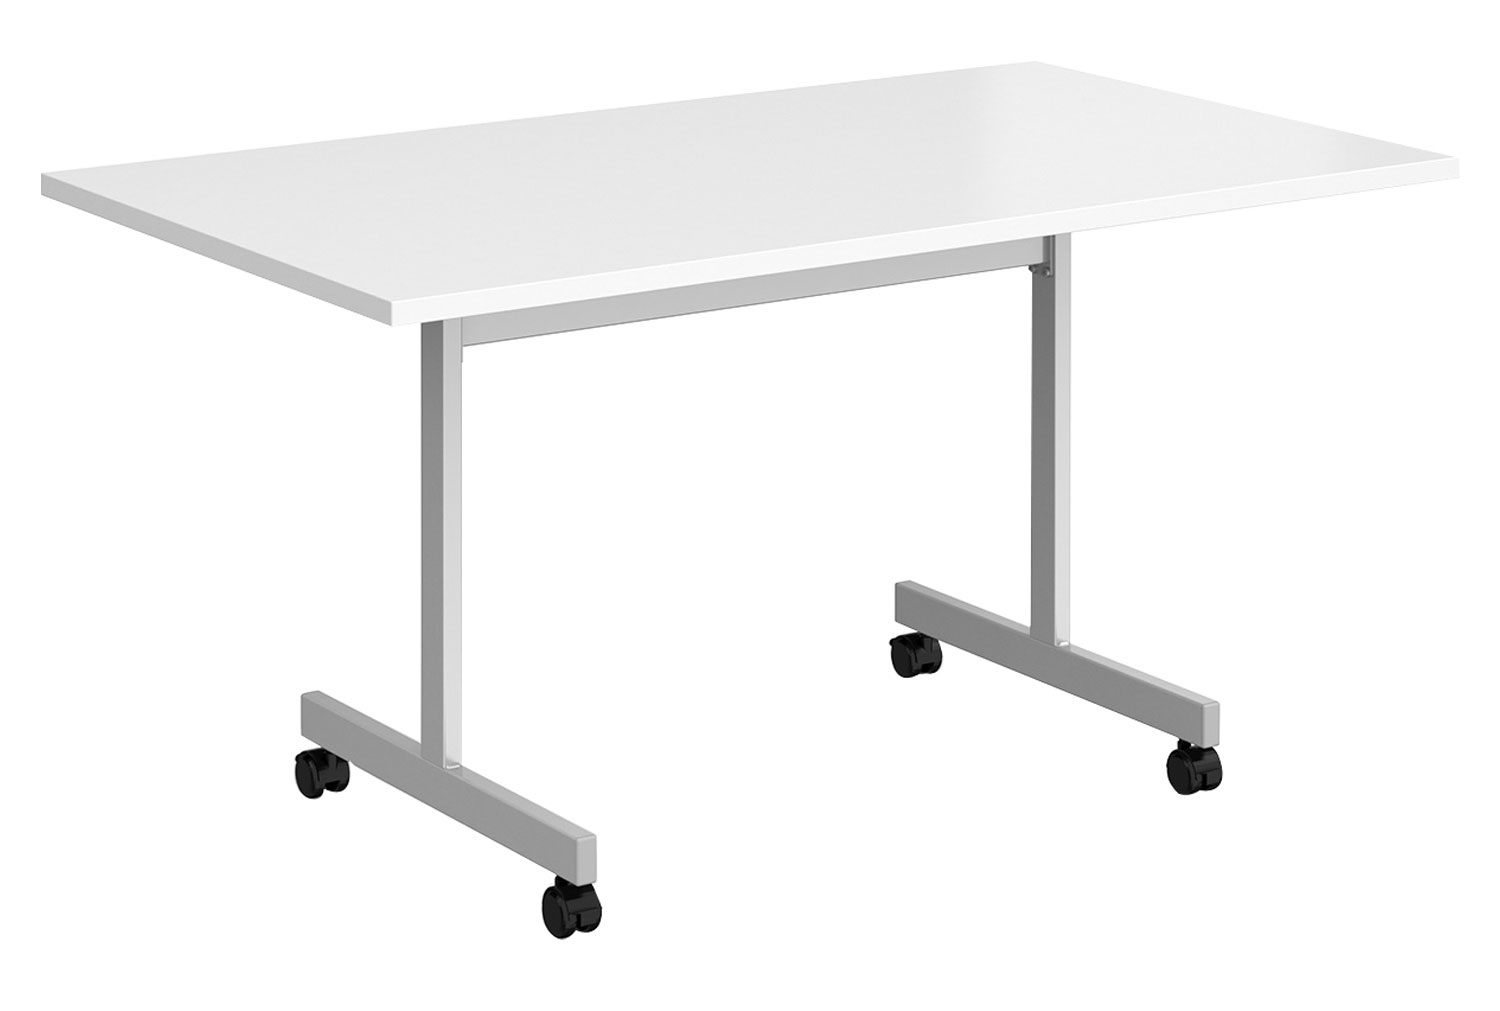 Foxham Rectangular Flip Top Meeting Tables, 140wx80dx73h (cm), White, Express Delivery